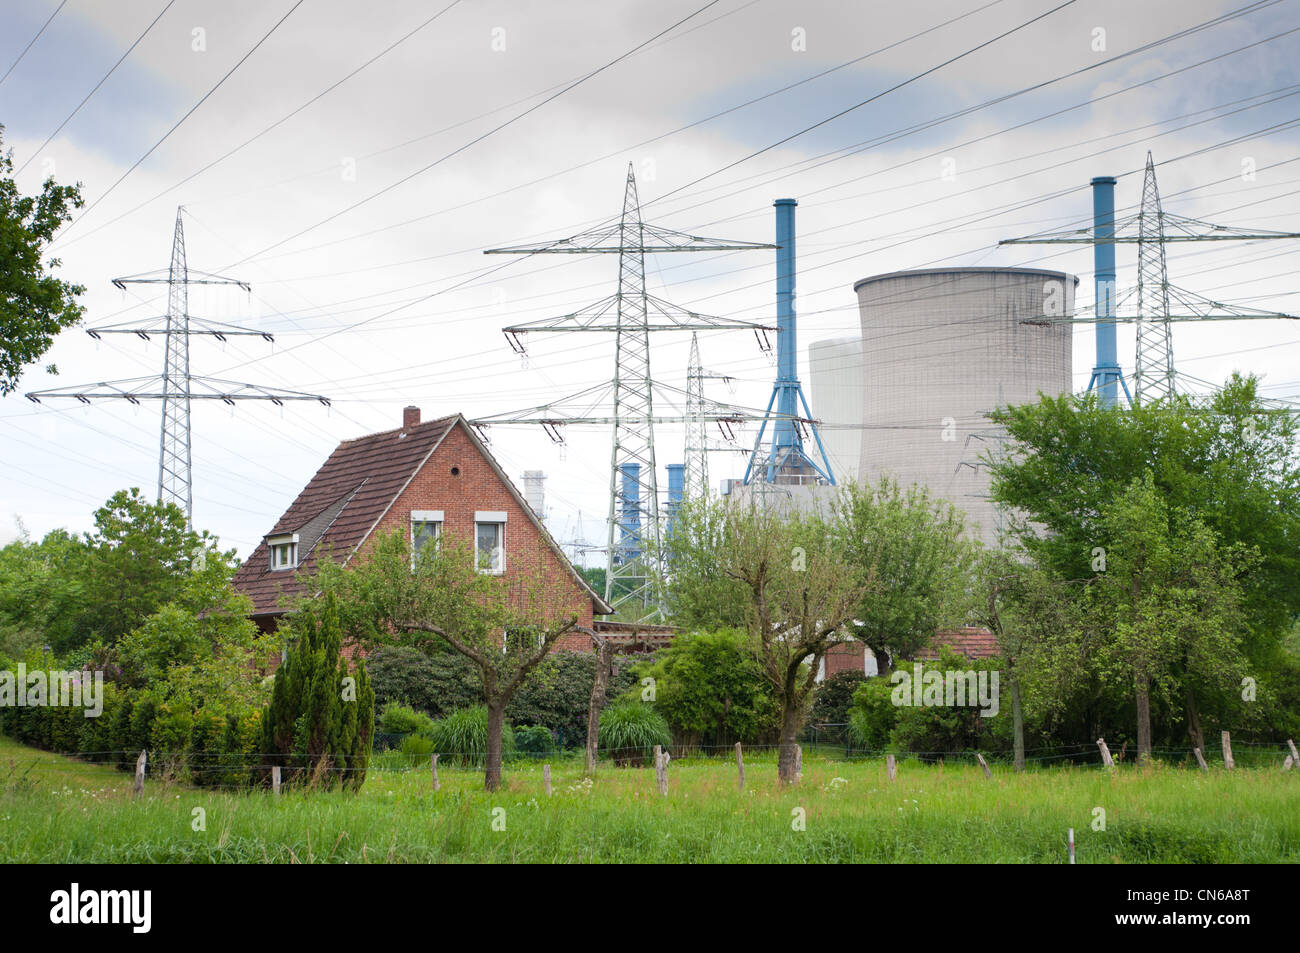 farmhouse in front of the nuclear plant Emsland, Germany Stock Photo